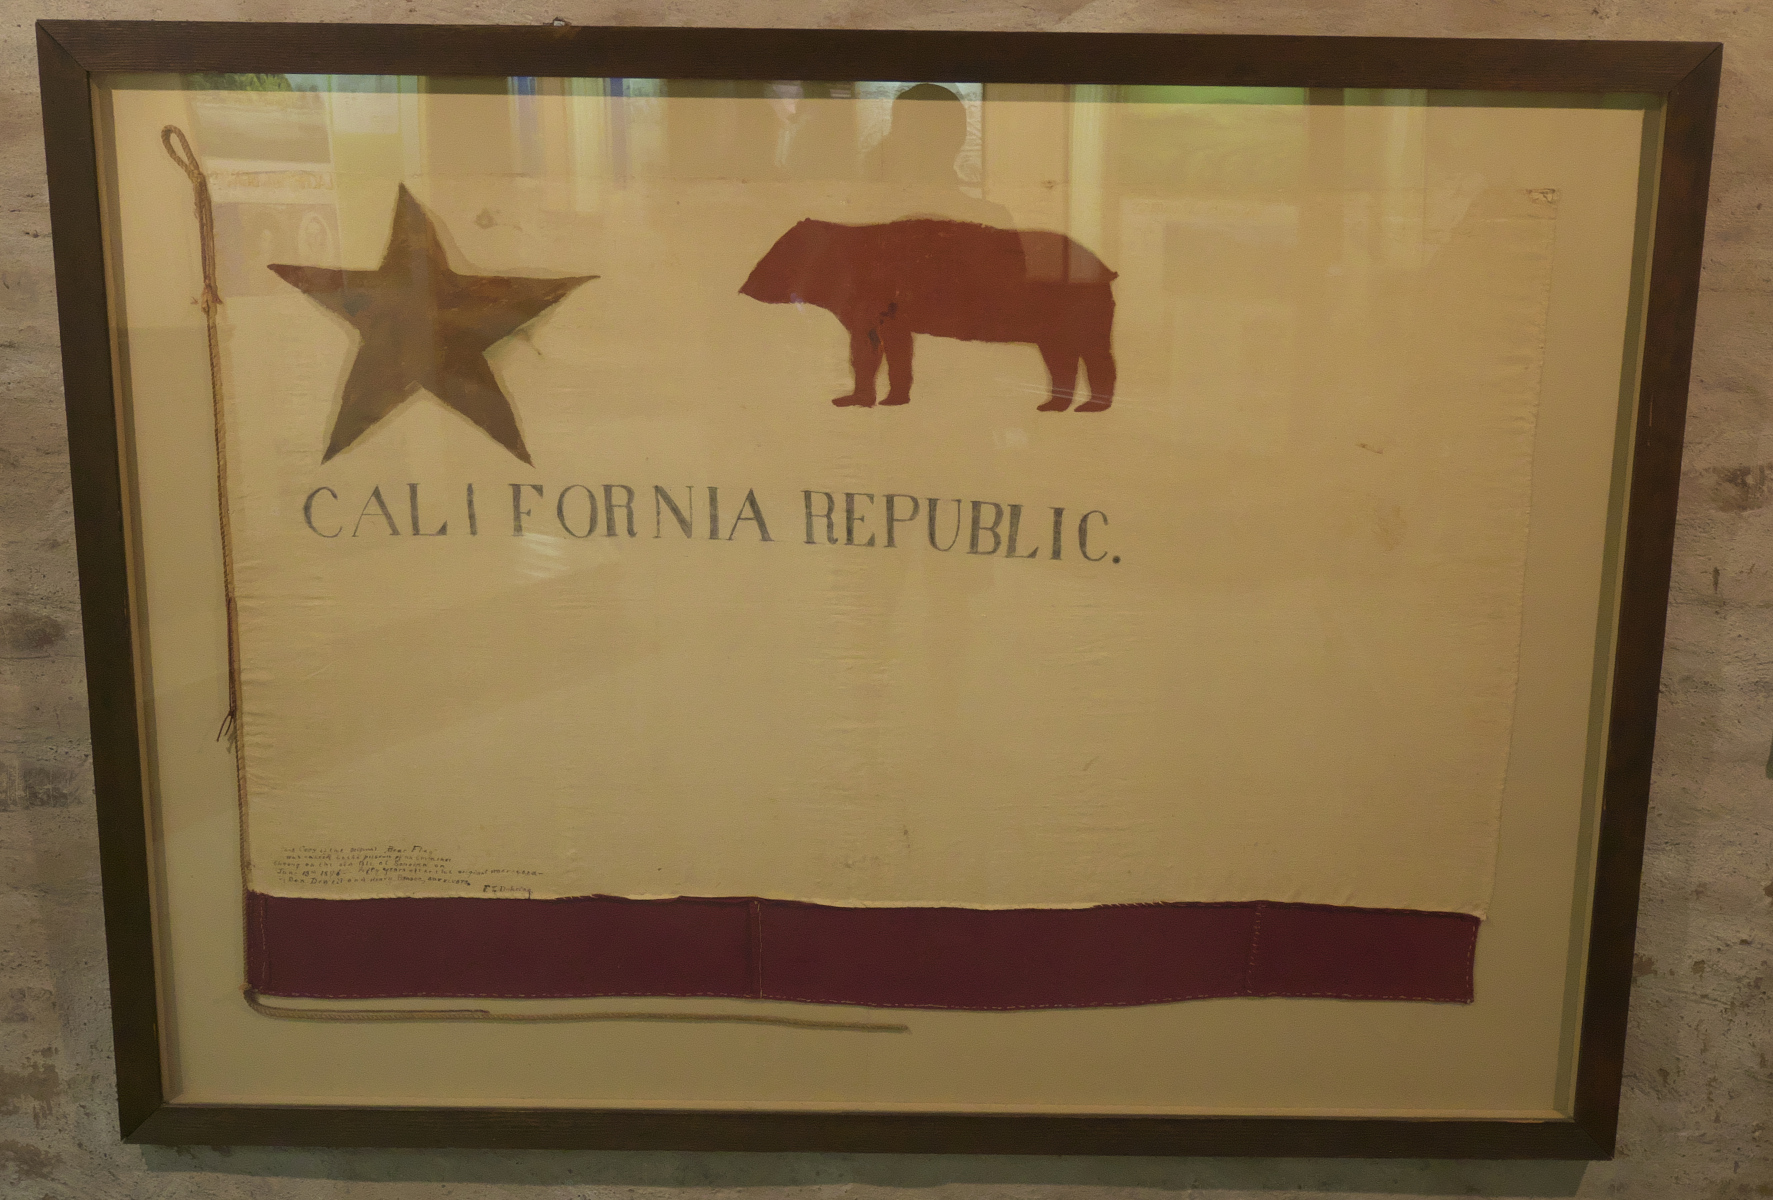 Replica of the original Bear Flag in the Sonoma Barracks. (The original flag was, like so much else, destroyed in the great San Francisco earthquake and fire of 1906.)